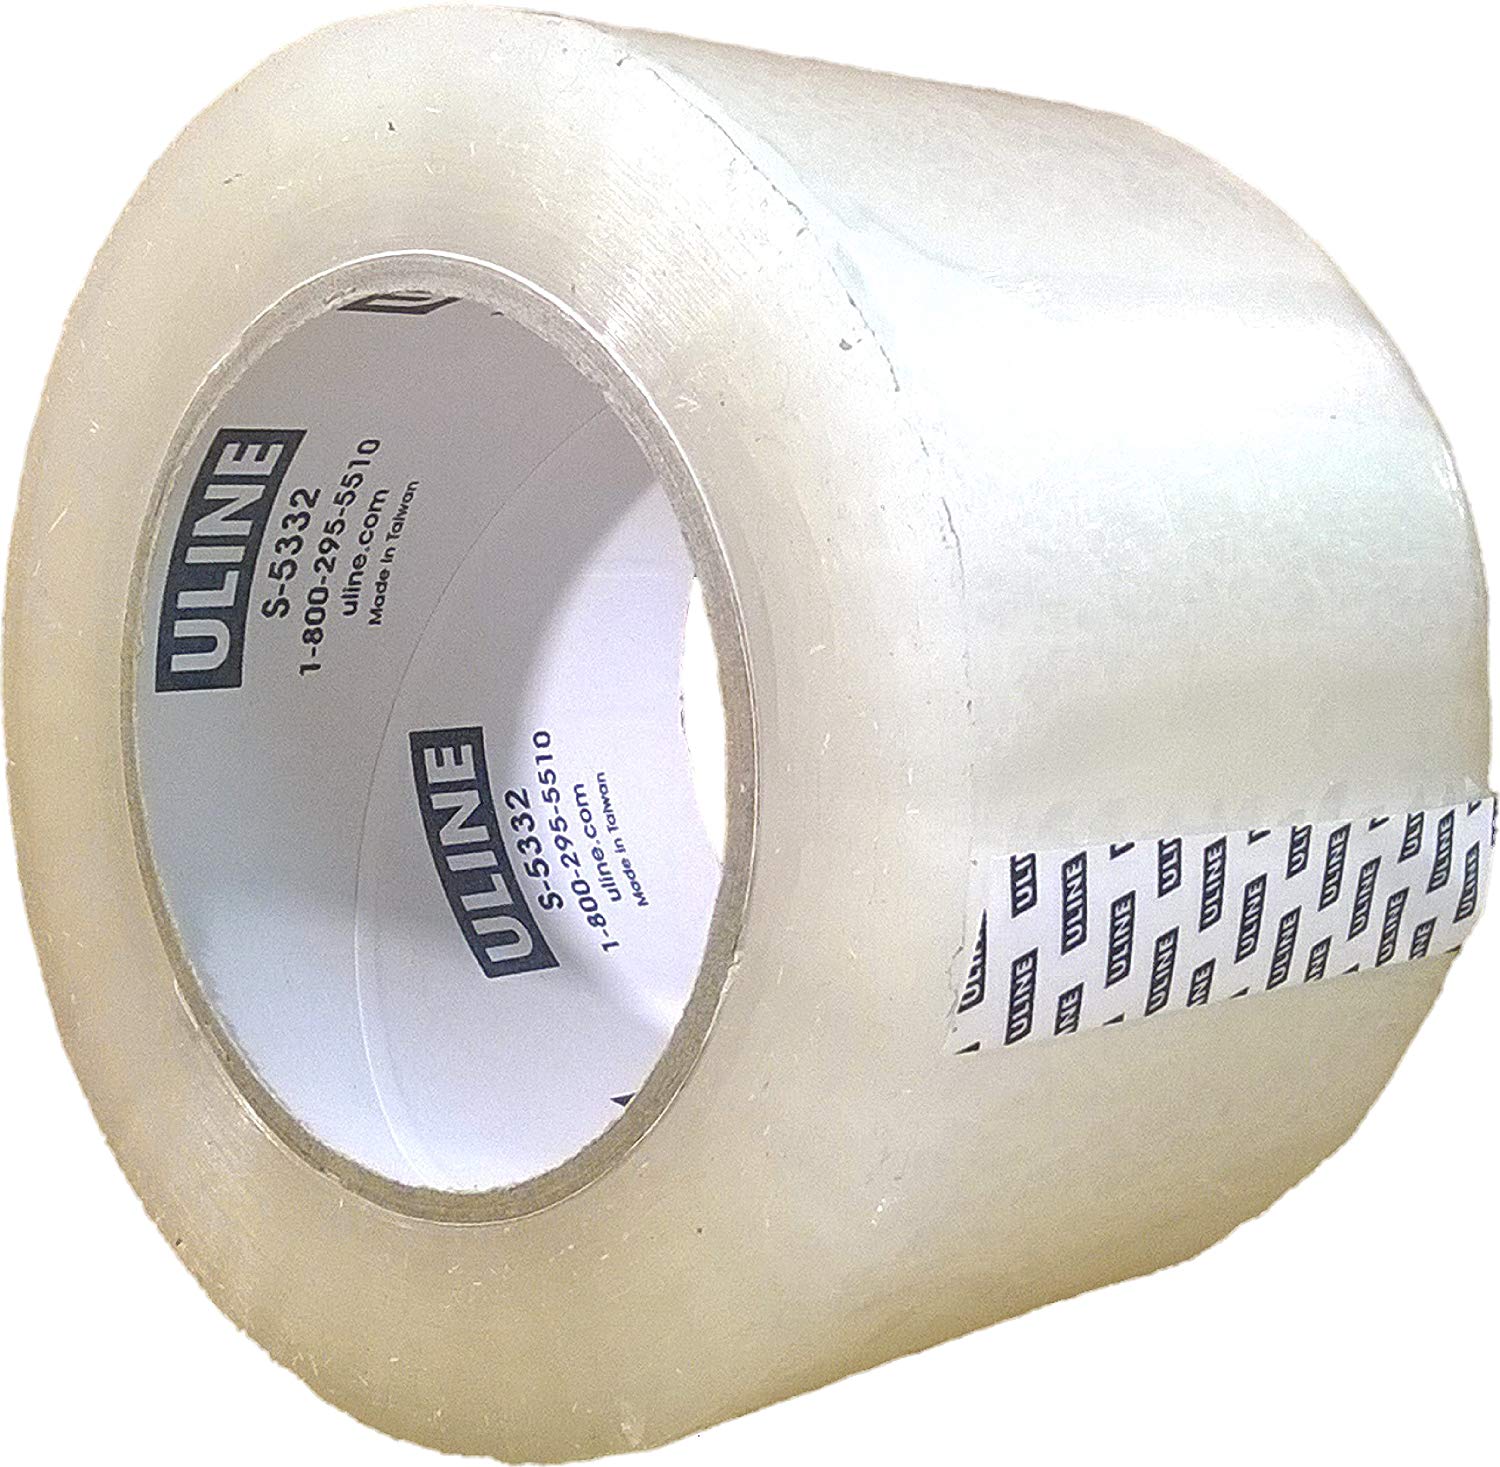 Amazon.com : Packing Tape, 3 Inch X 110 Yard 2.6 Mil Crystal Clear ...